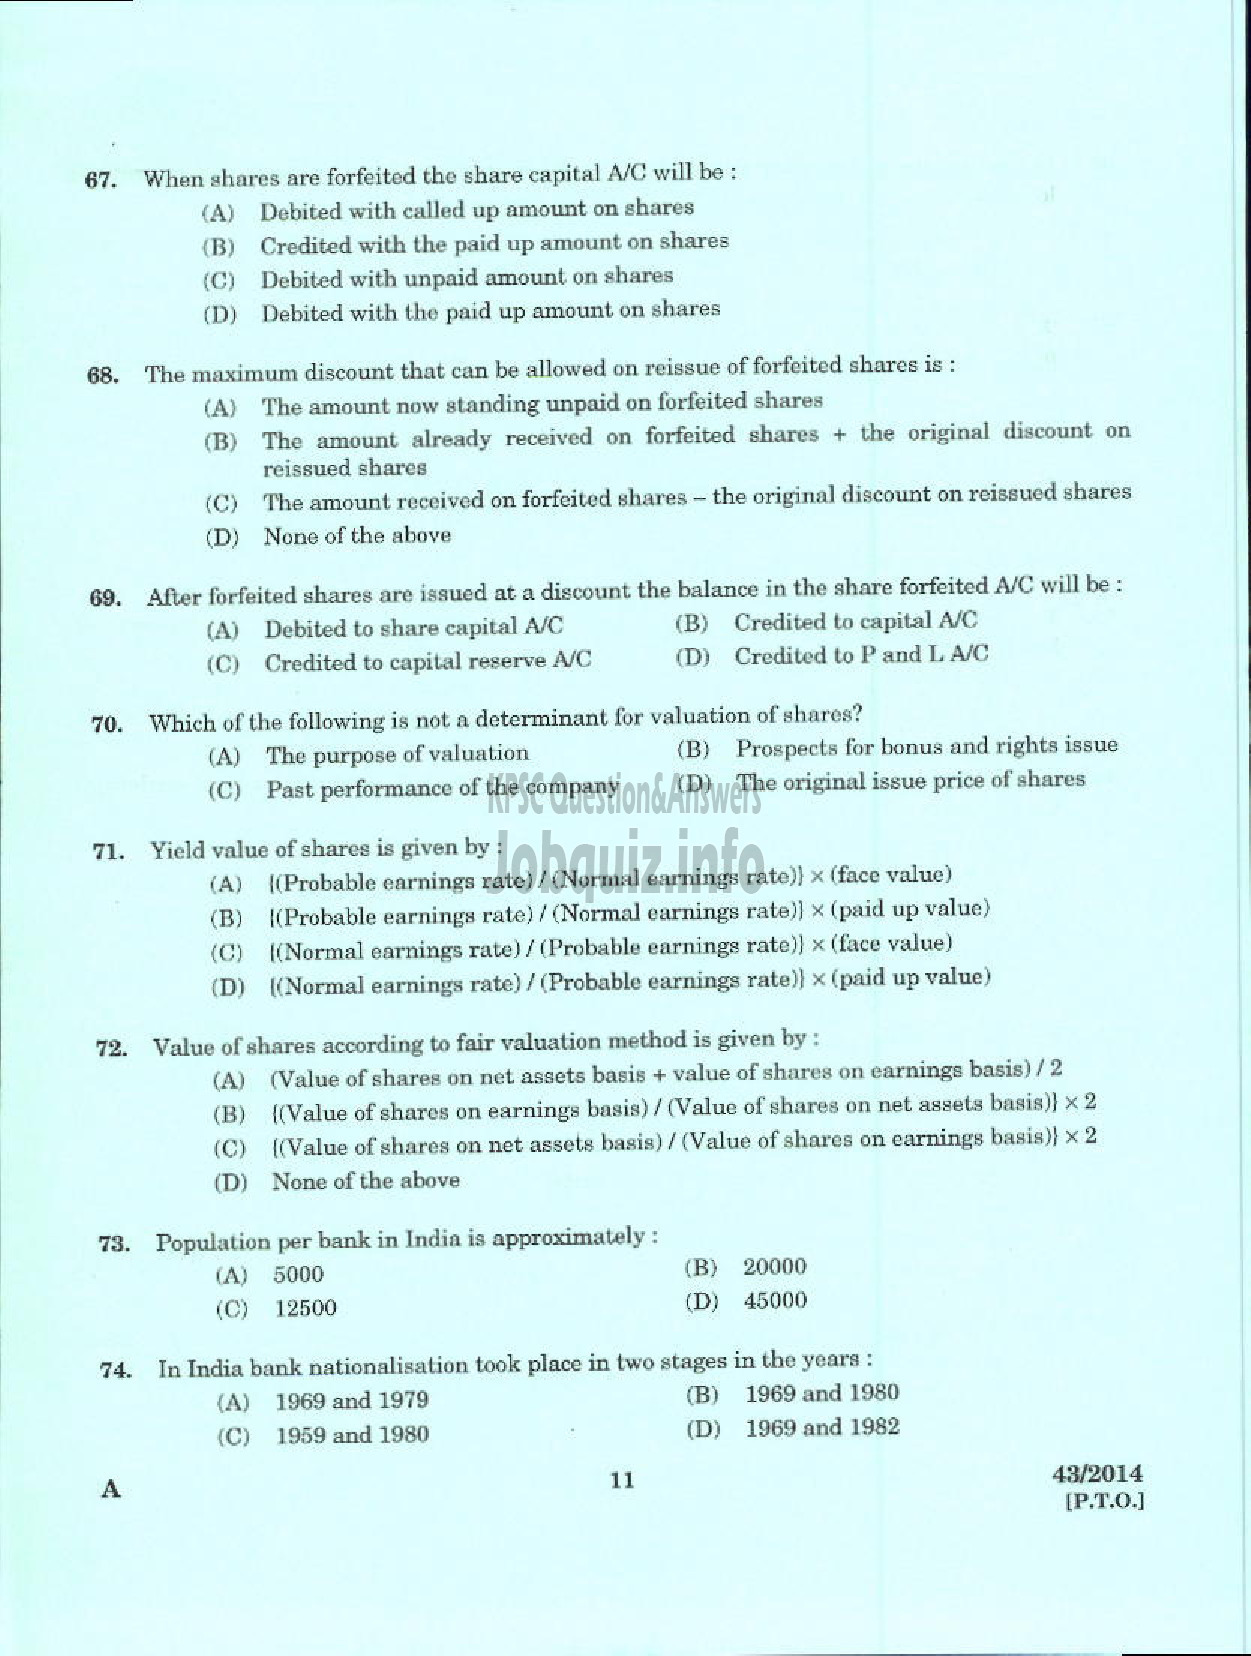 Kerala PSC Question Paper - DEPUTY GENERAL MANAGER DCB IDKY AND KSGD PART I AND PART II-9